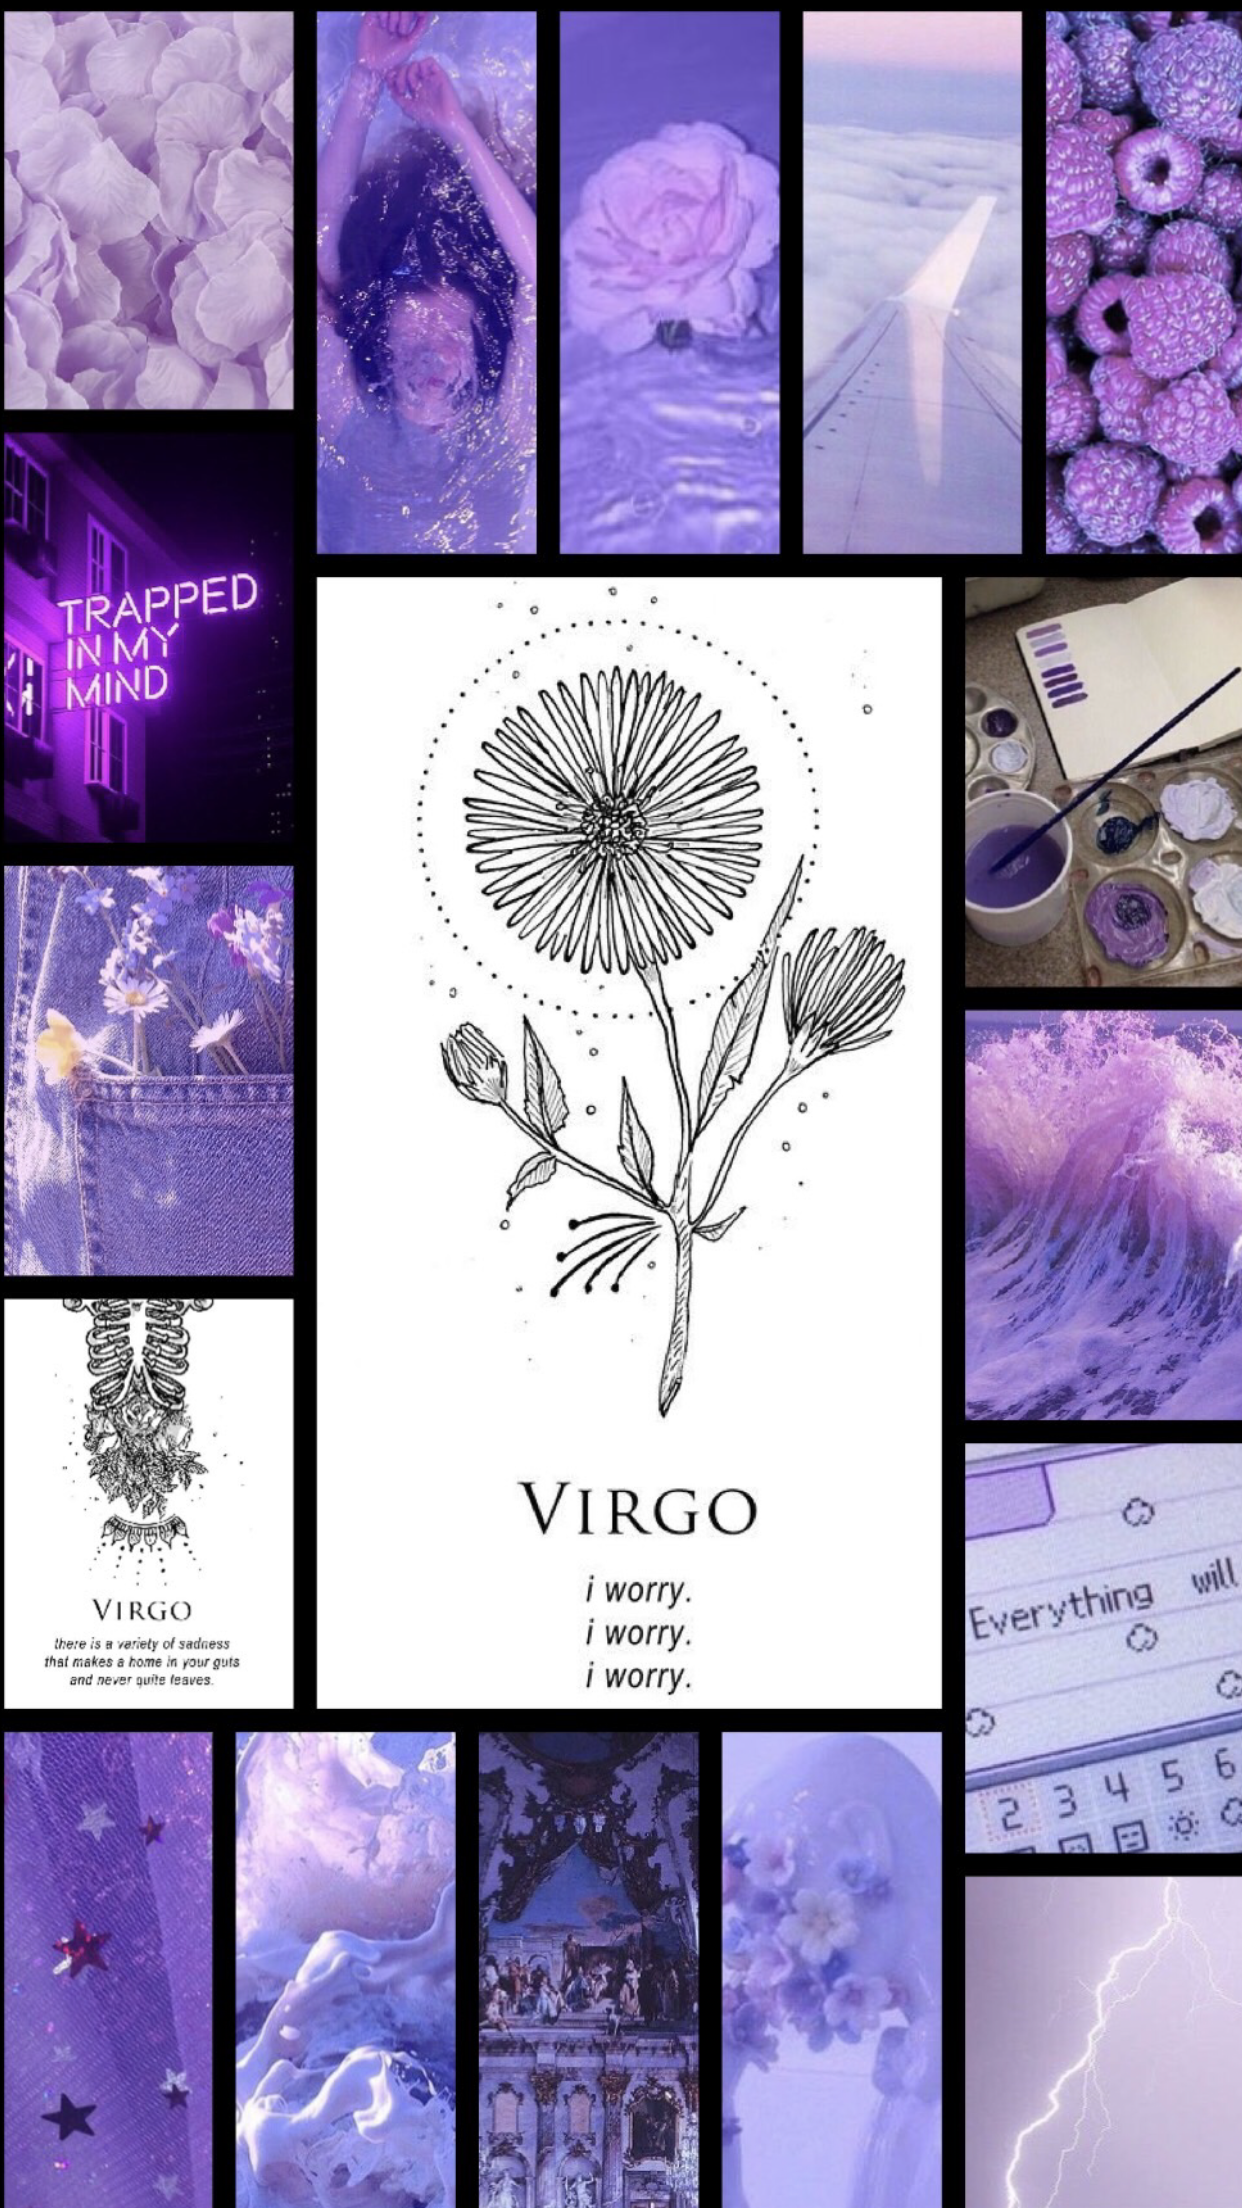 PERFECT IPHONE WALLPAPERS FOR VIRGO  This is iT Original